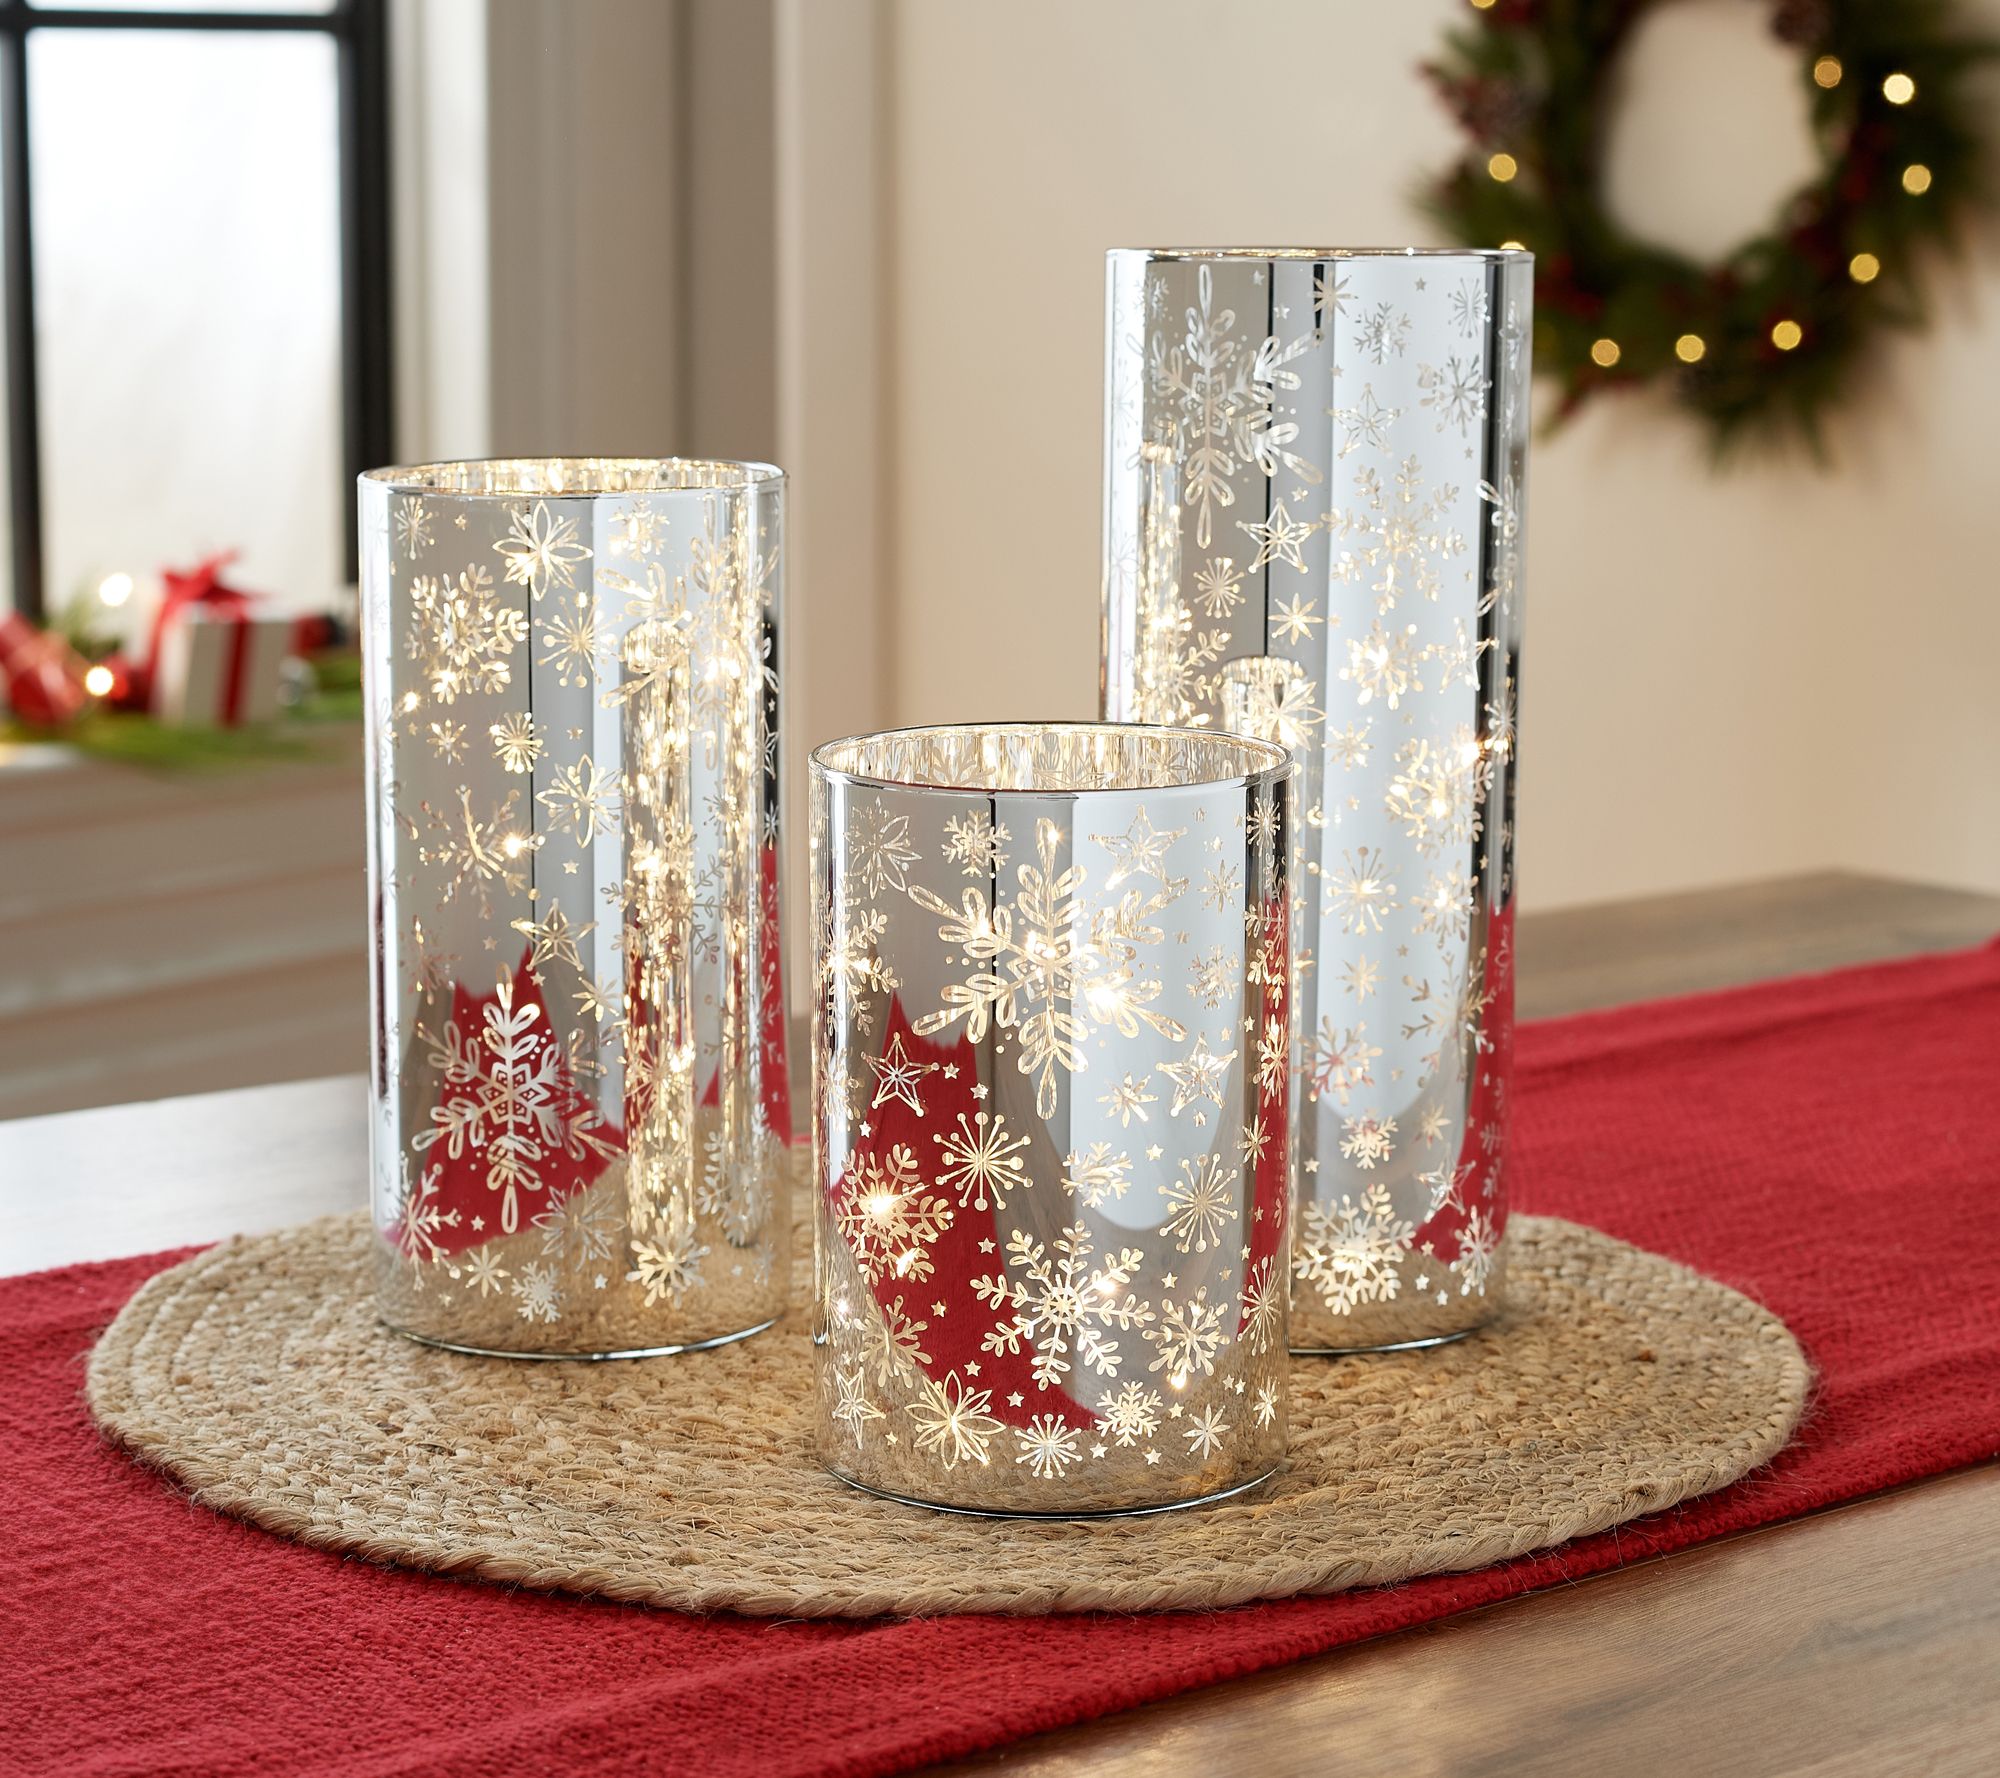 Set of 4 Illuminated Holiday Votives with Sheer Gift Bags by Valerie Parr Hill 